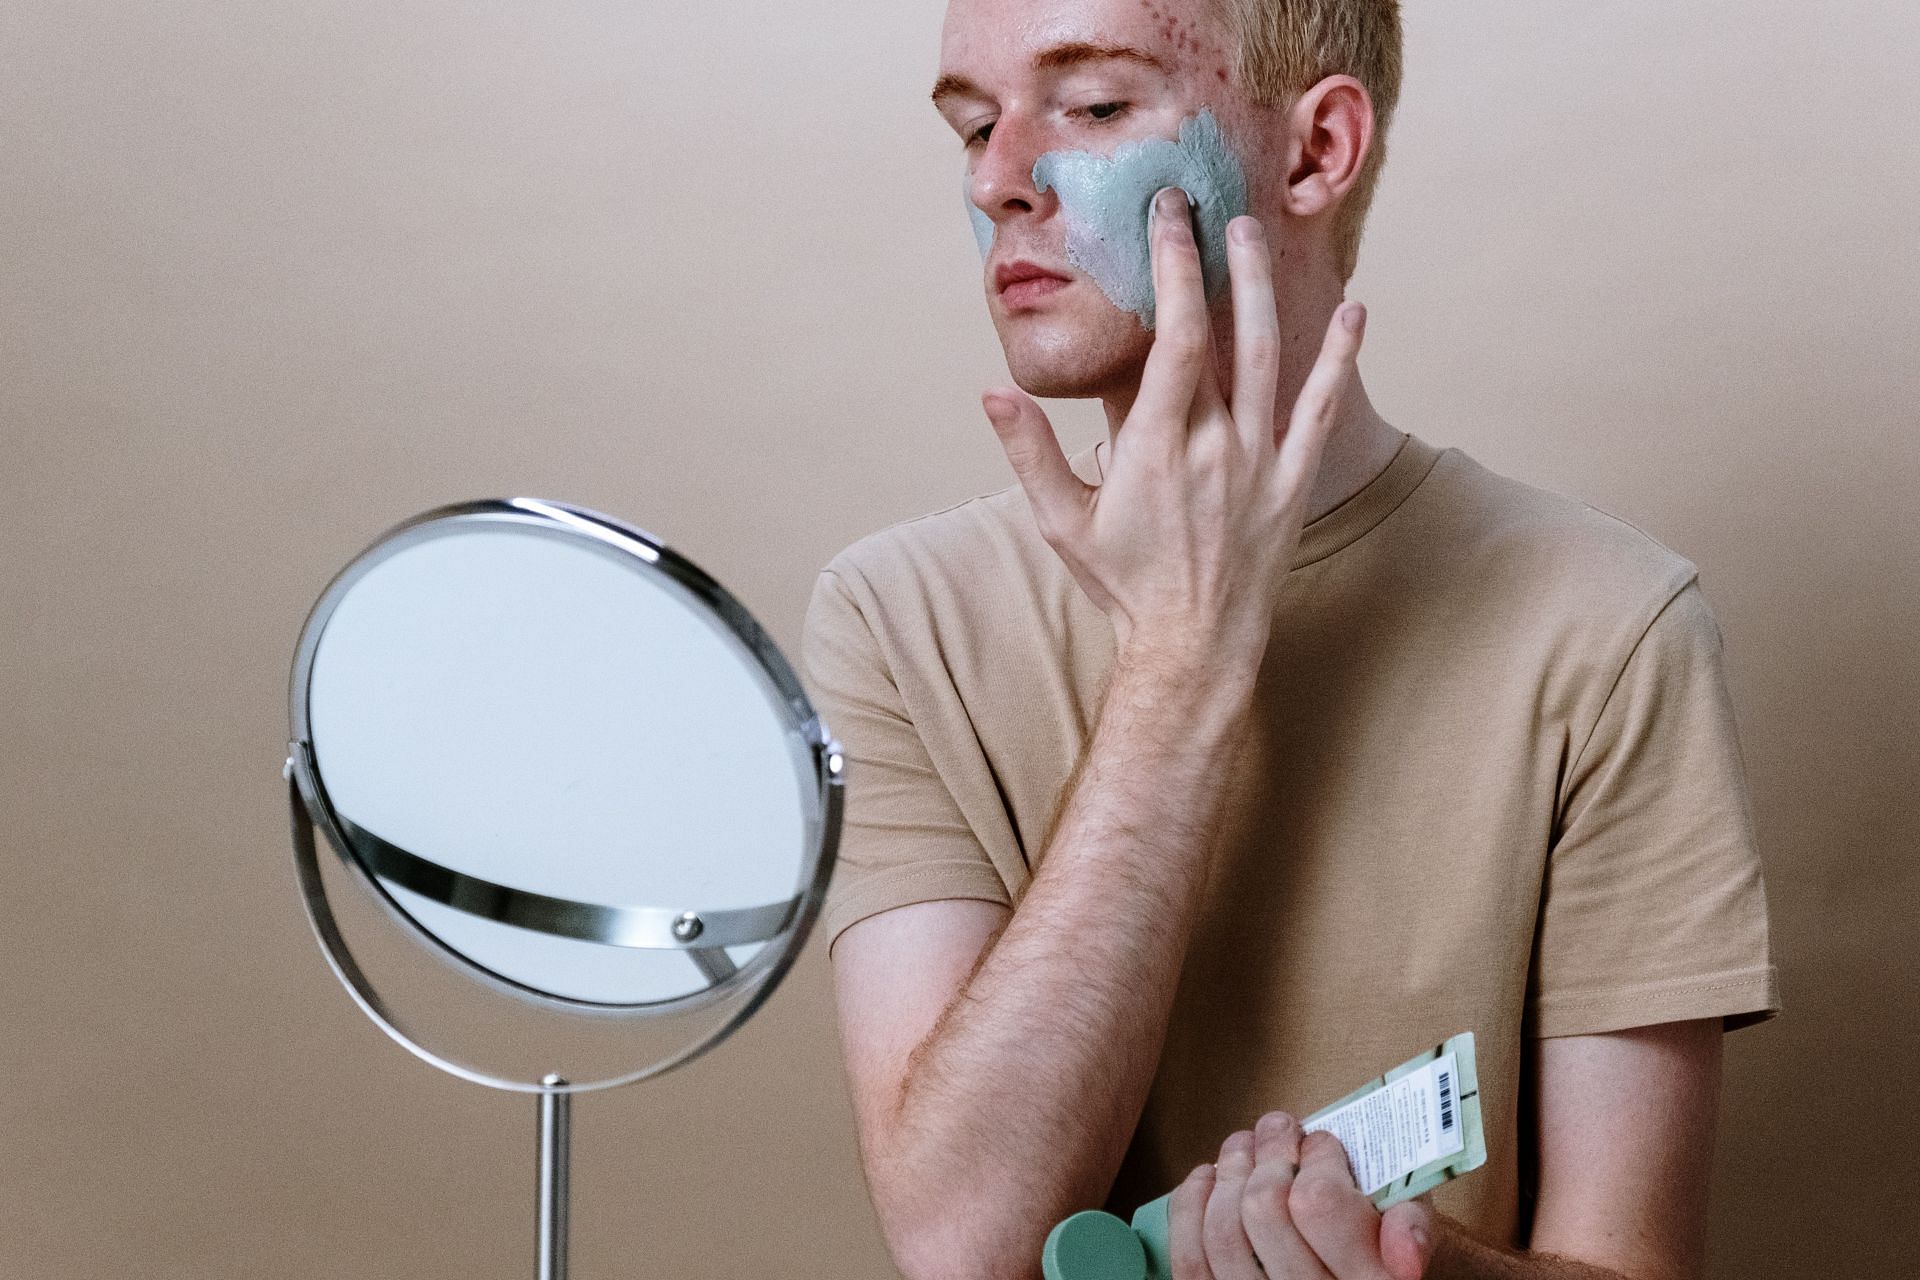 negative effects of using the new skincare trend (image sourced via Pexels / Photo by Cotton Bro)